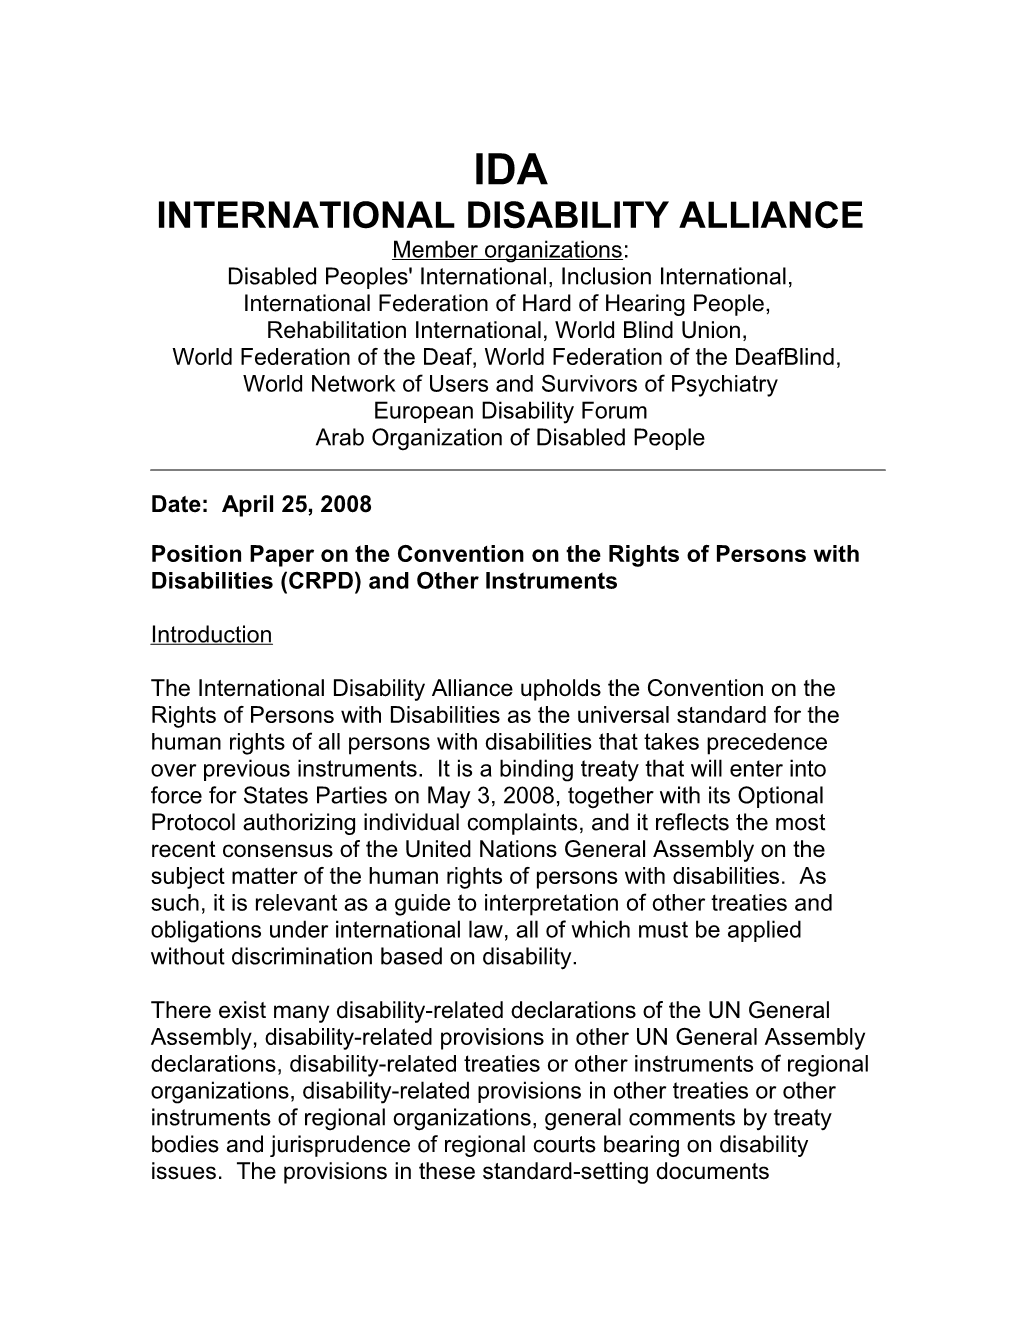 The International Disability Alliance Upholds the Convention on the Rights of Persons With